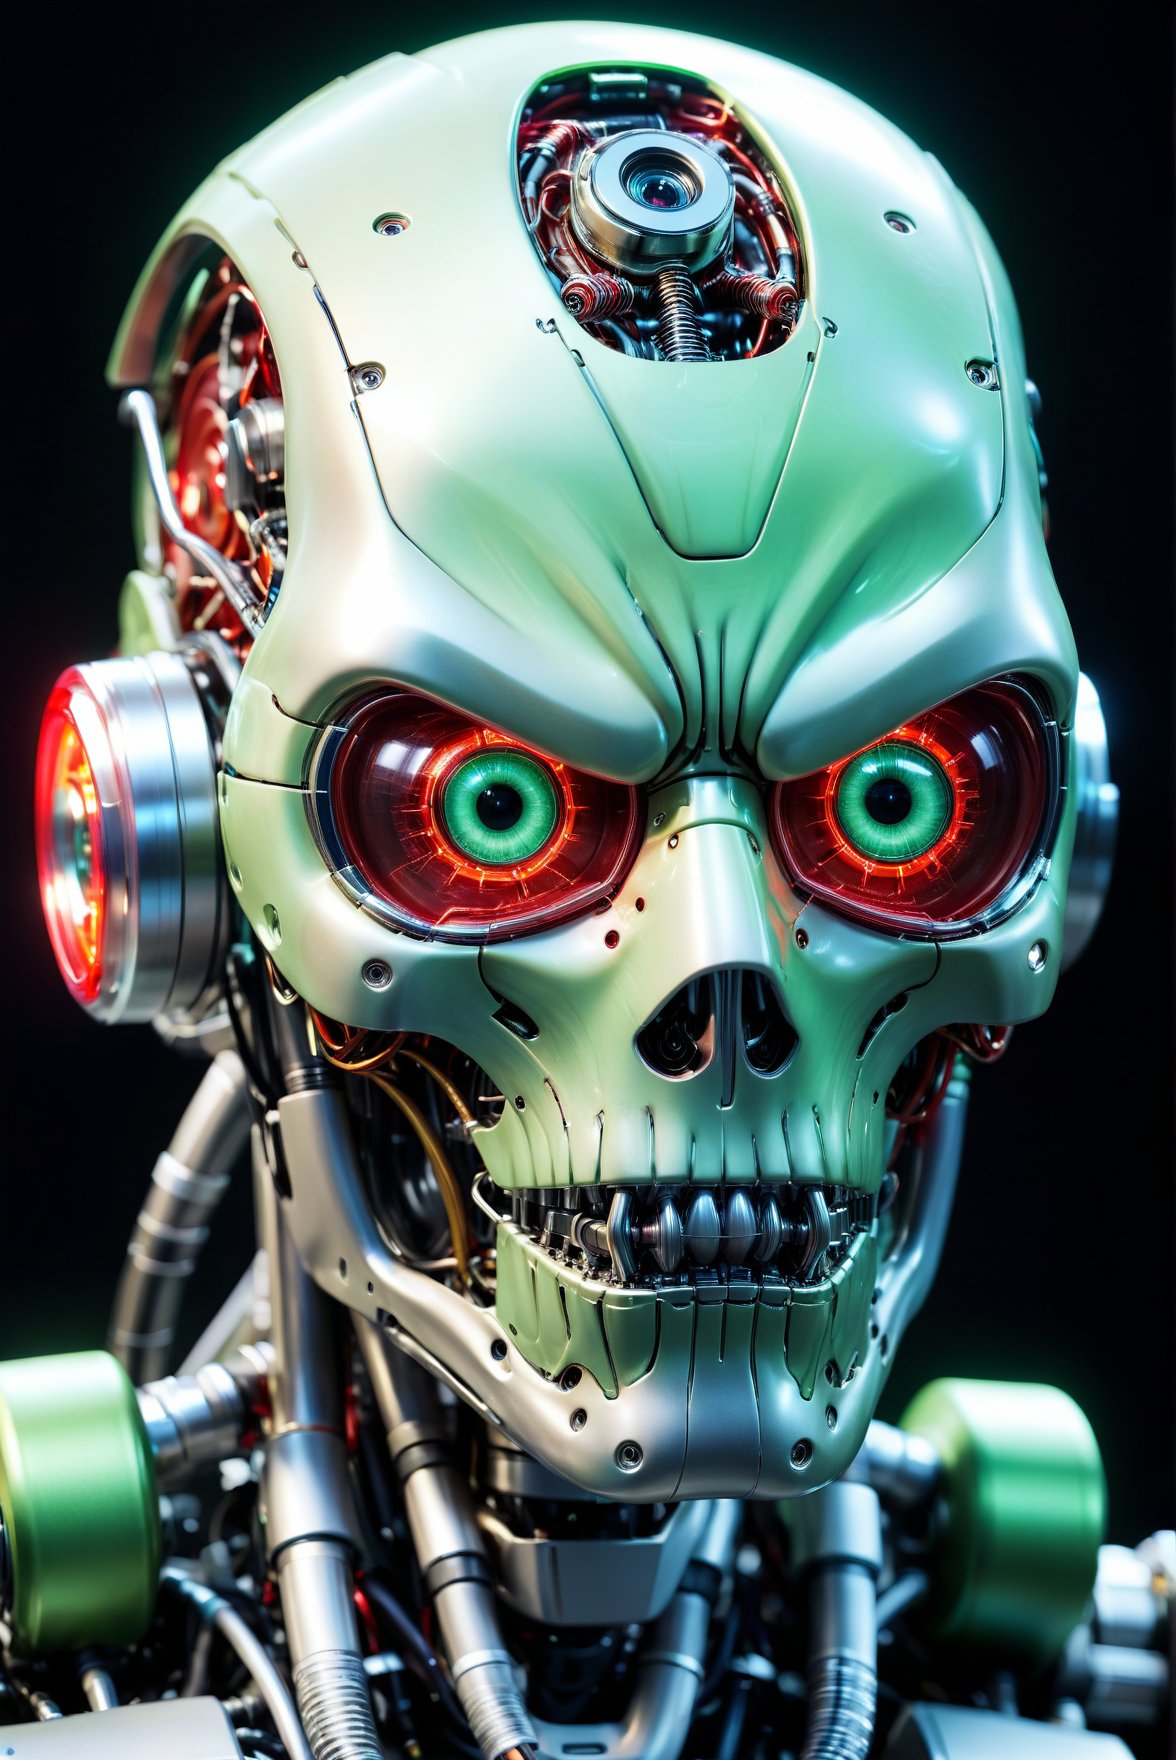 A close-up of a heavily muscled robot head with a bio-mechanical mask. The mask appears to be a fusion of metal and living tissue, pulsating with a faint green light. One eye is replaced with a cybernetic implant that glows red, while the other features a reptilian slit pupil.